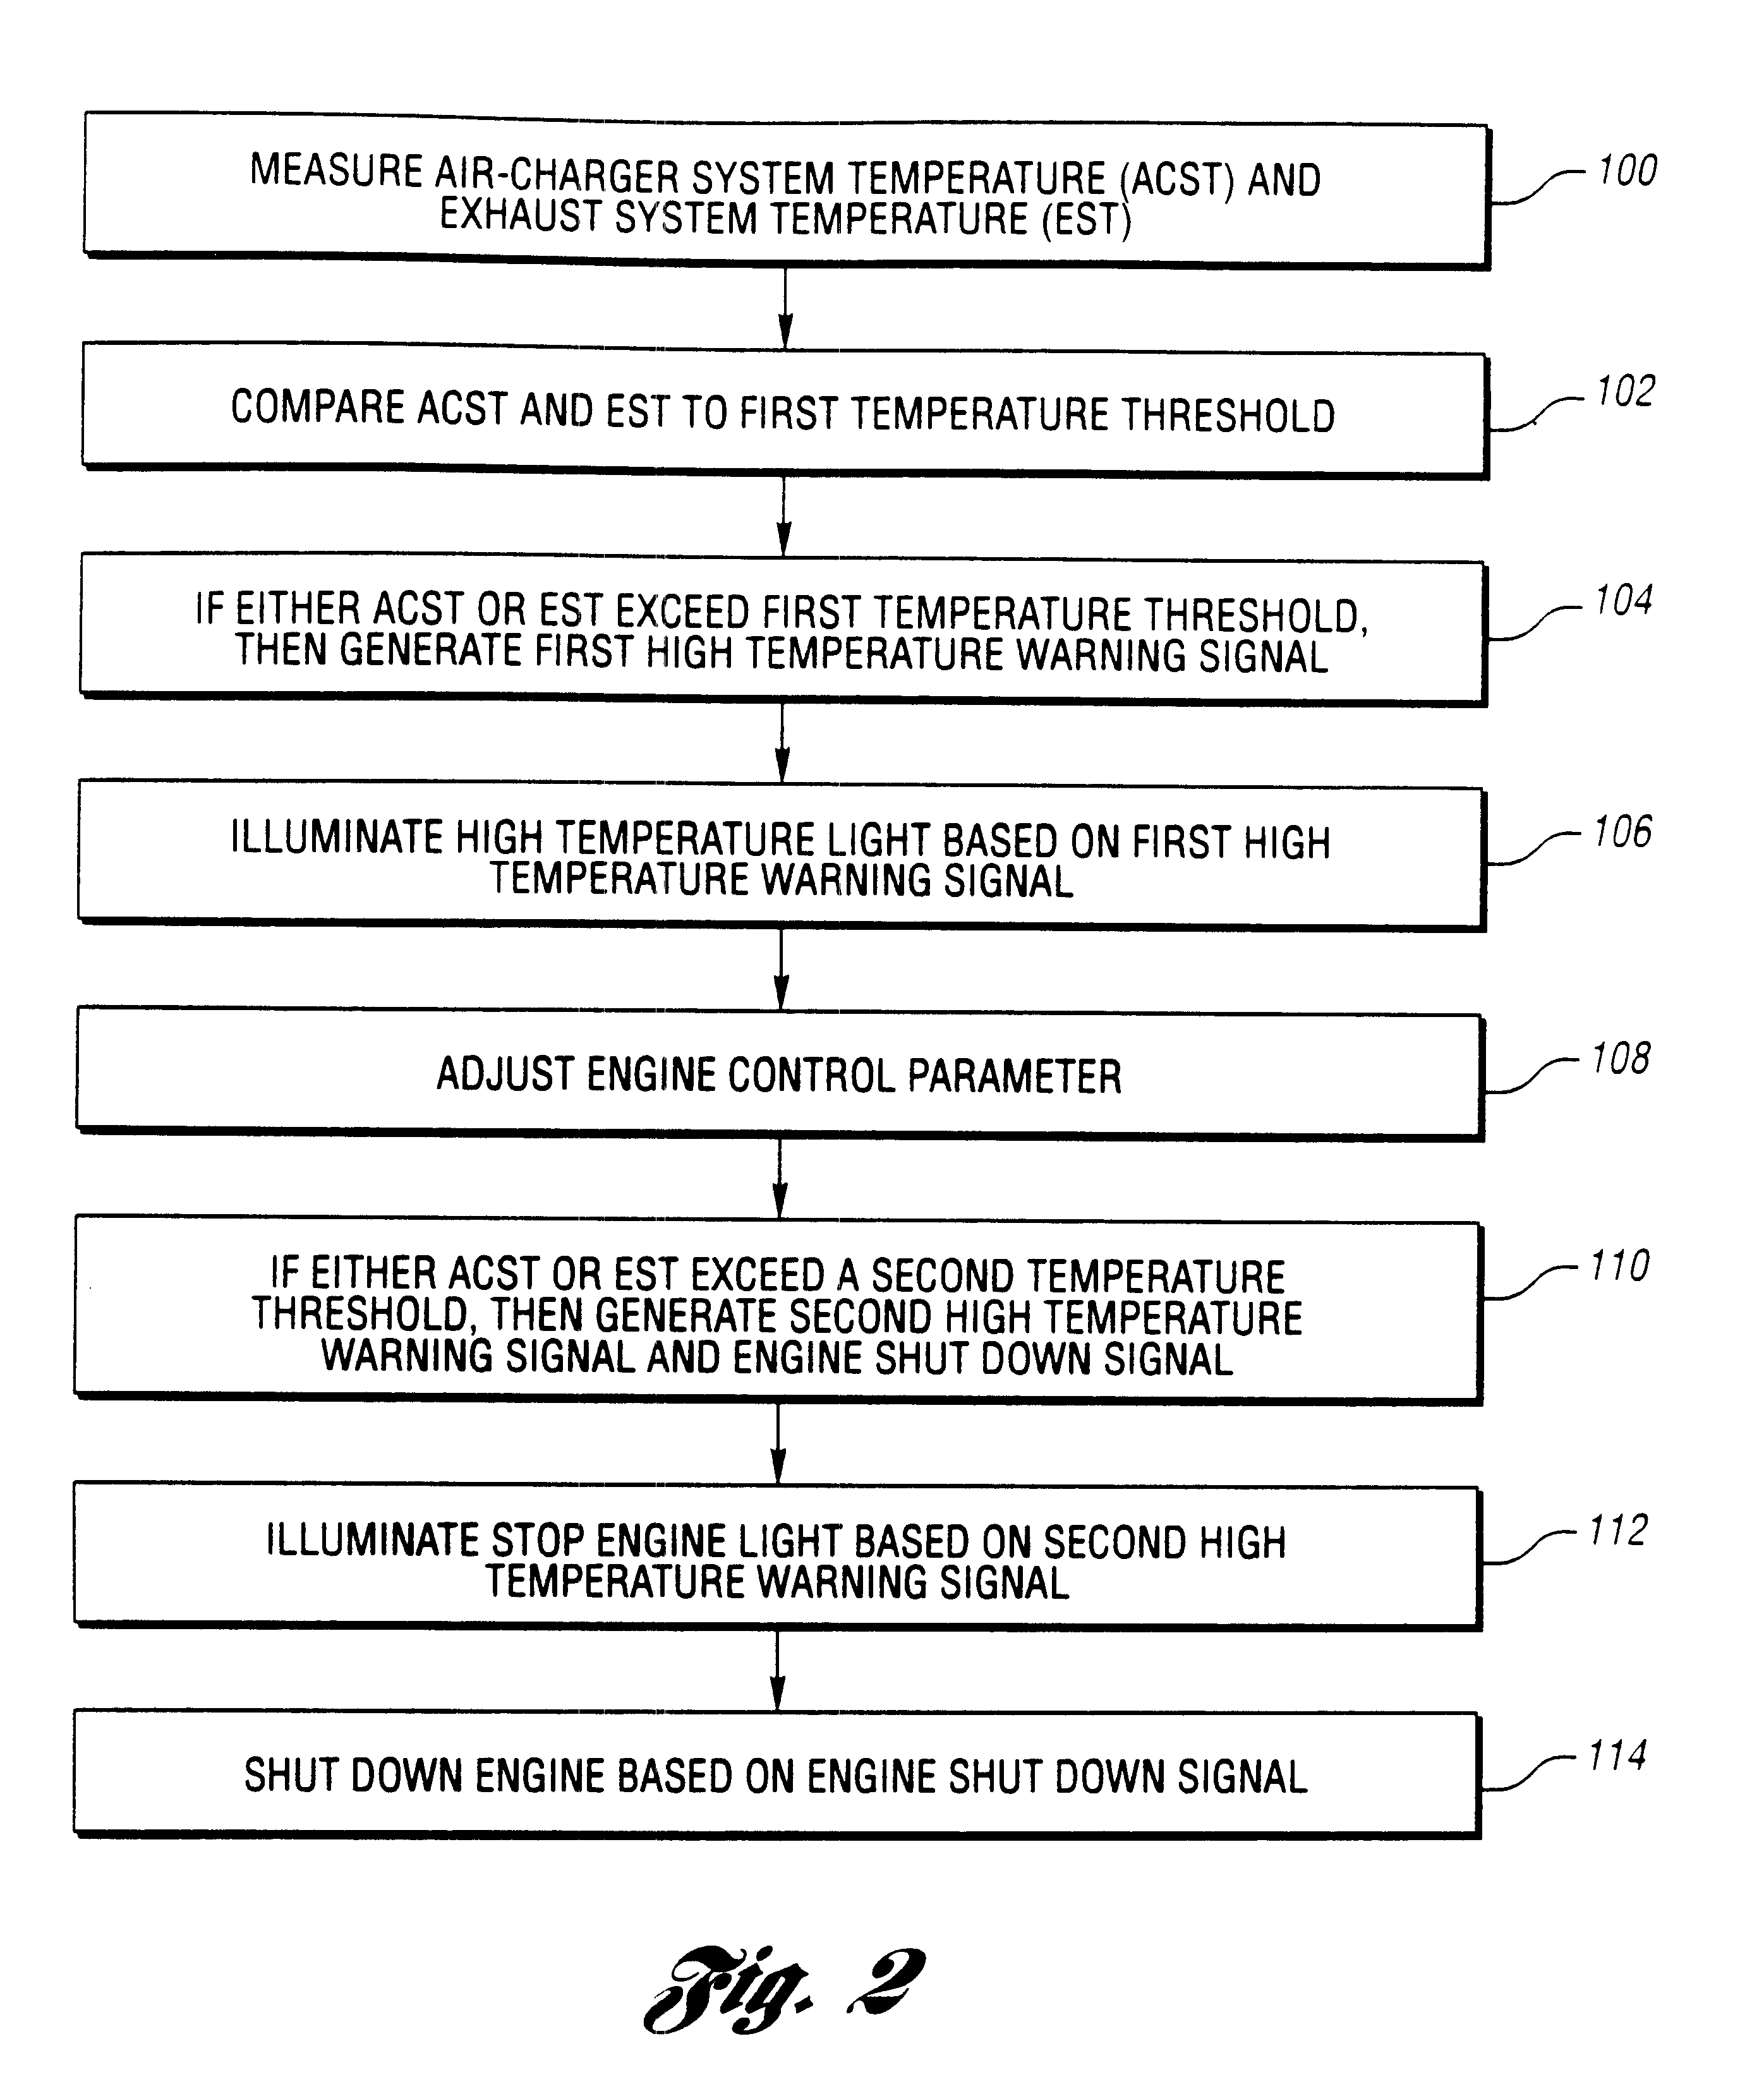 Method and system for enhanced engine control based on exhaust temperature